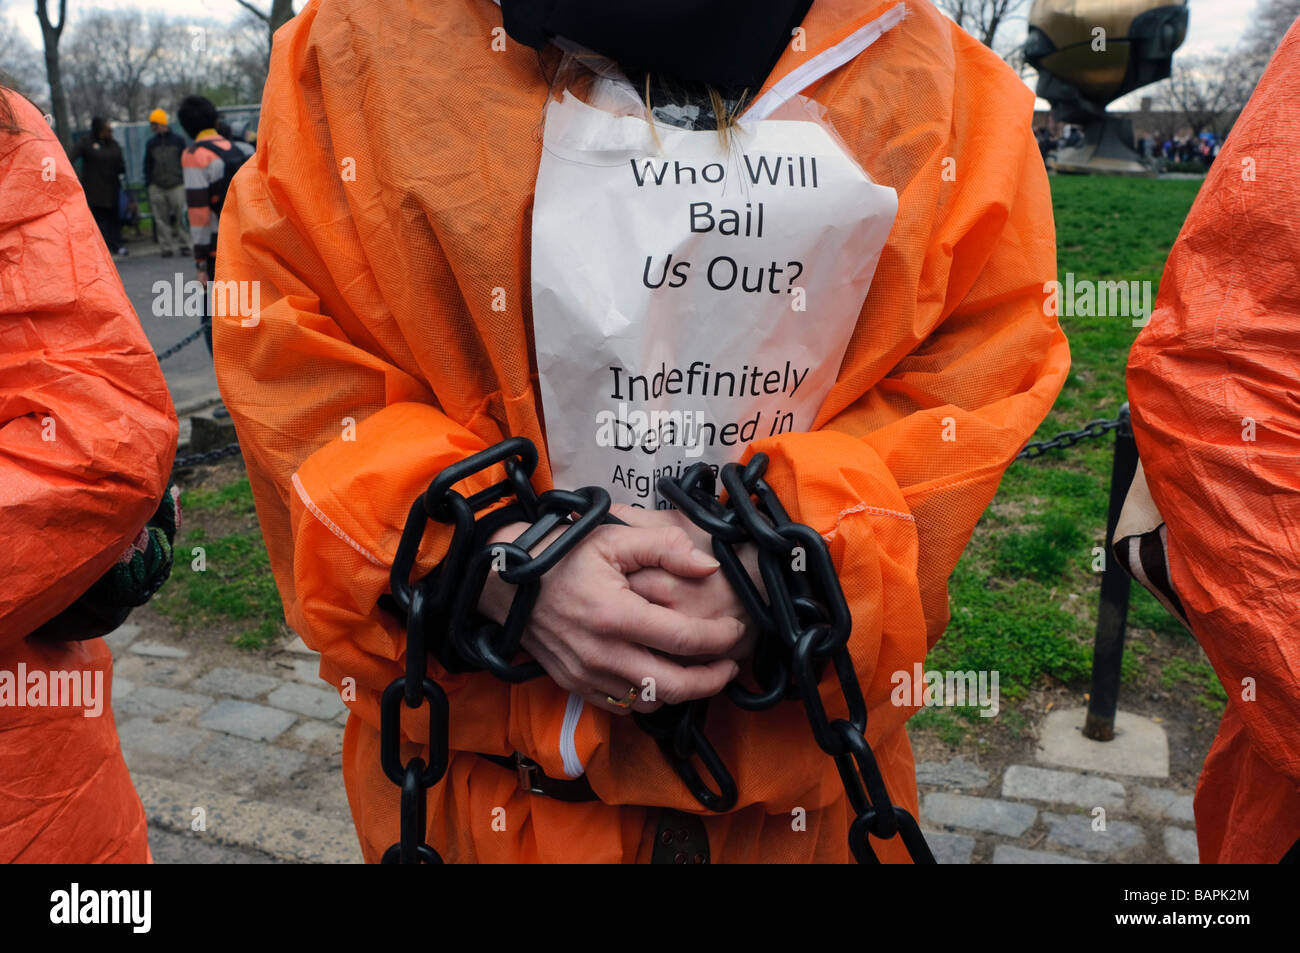 Demonstrators protest Guantanamo torture and corporate bailouts. Stock Photo